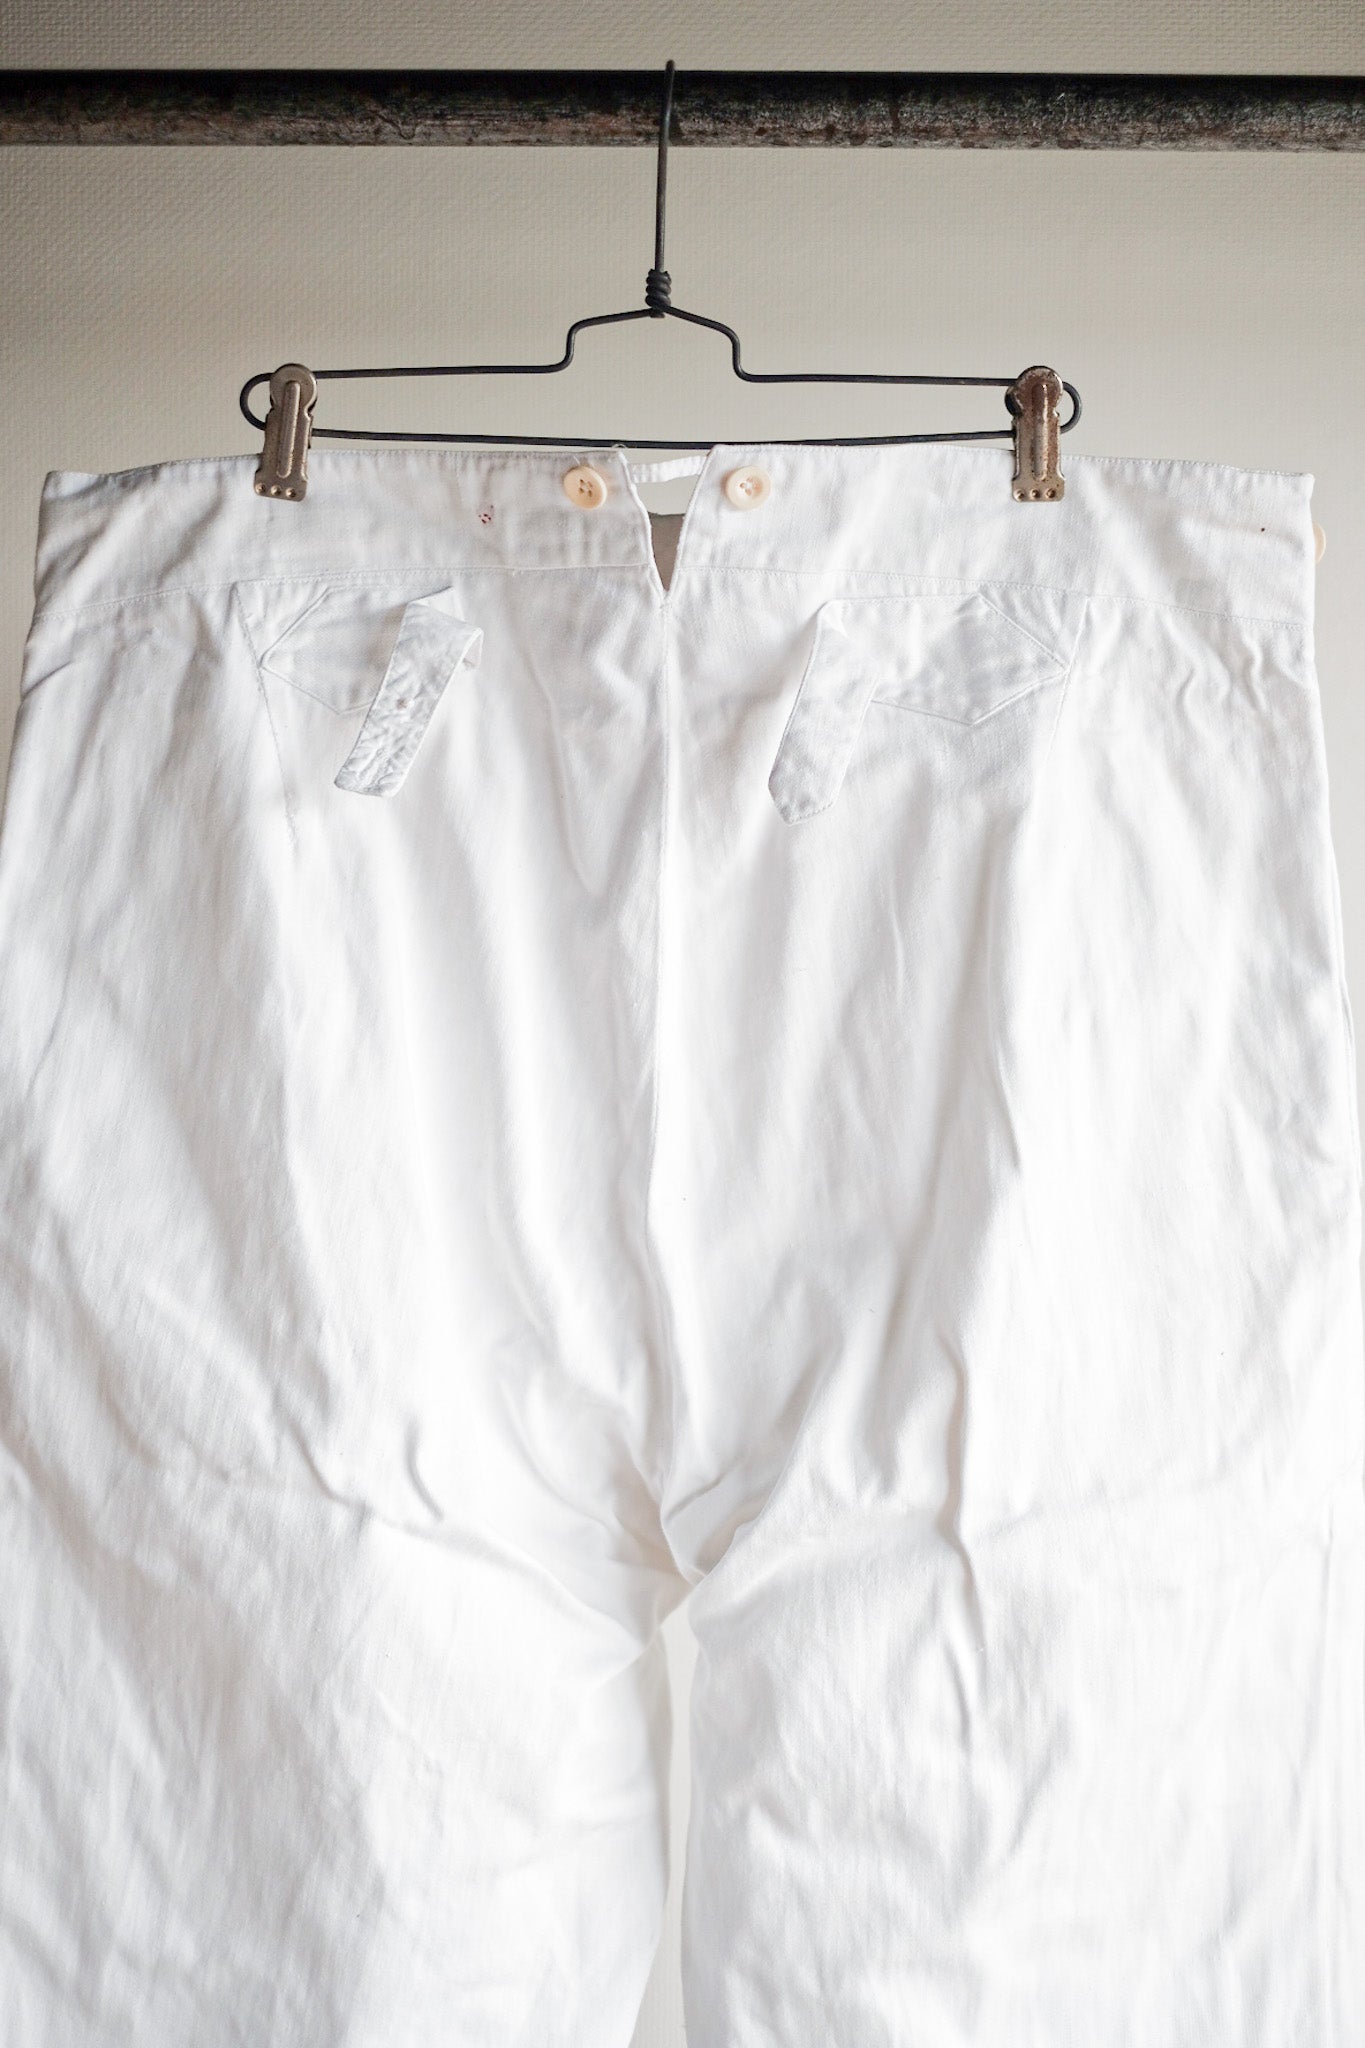 【~30's】French Navy White Cotton Trousers